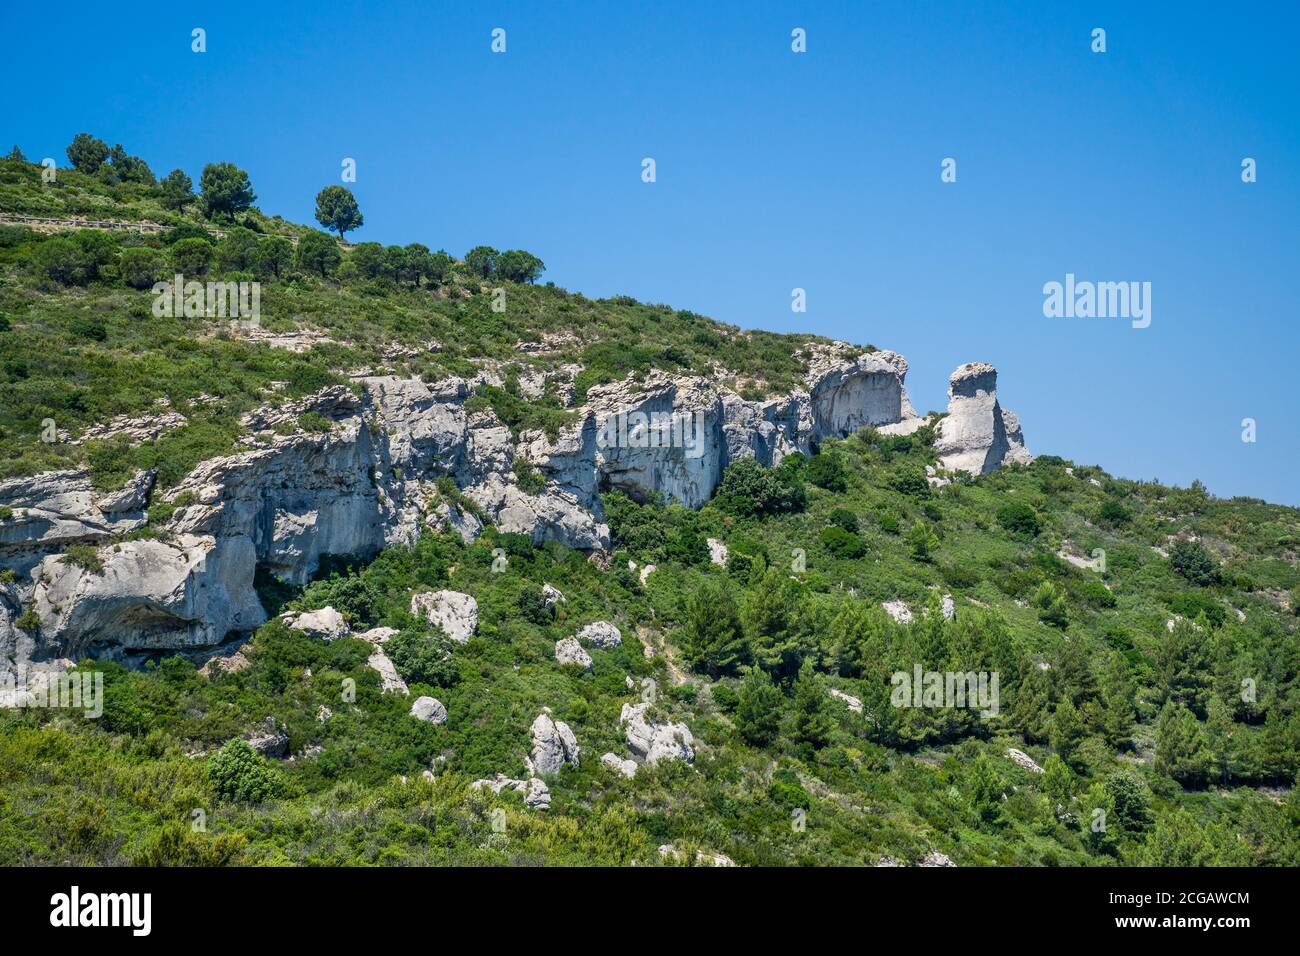 limestone formations with natural bridges on the slopes of the Massif des Calanques in the Calanques National Park along the clifftop road of Route de Stock Photo